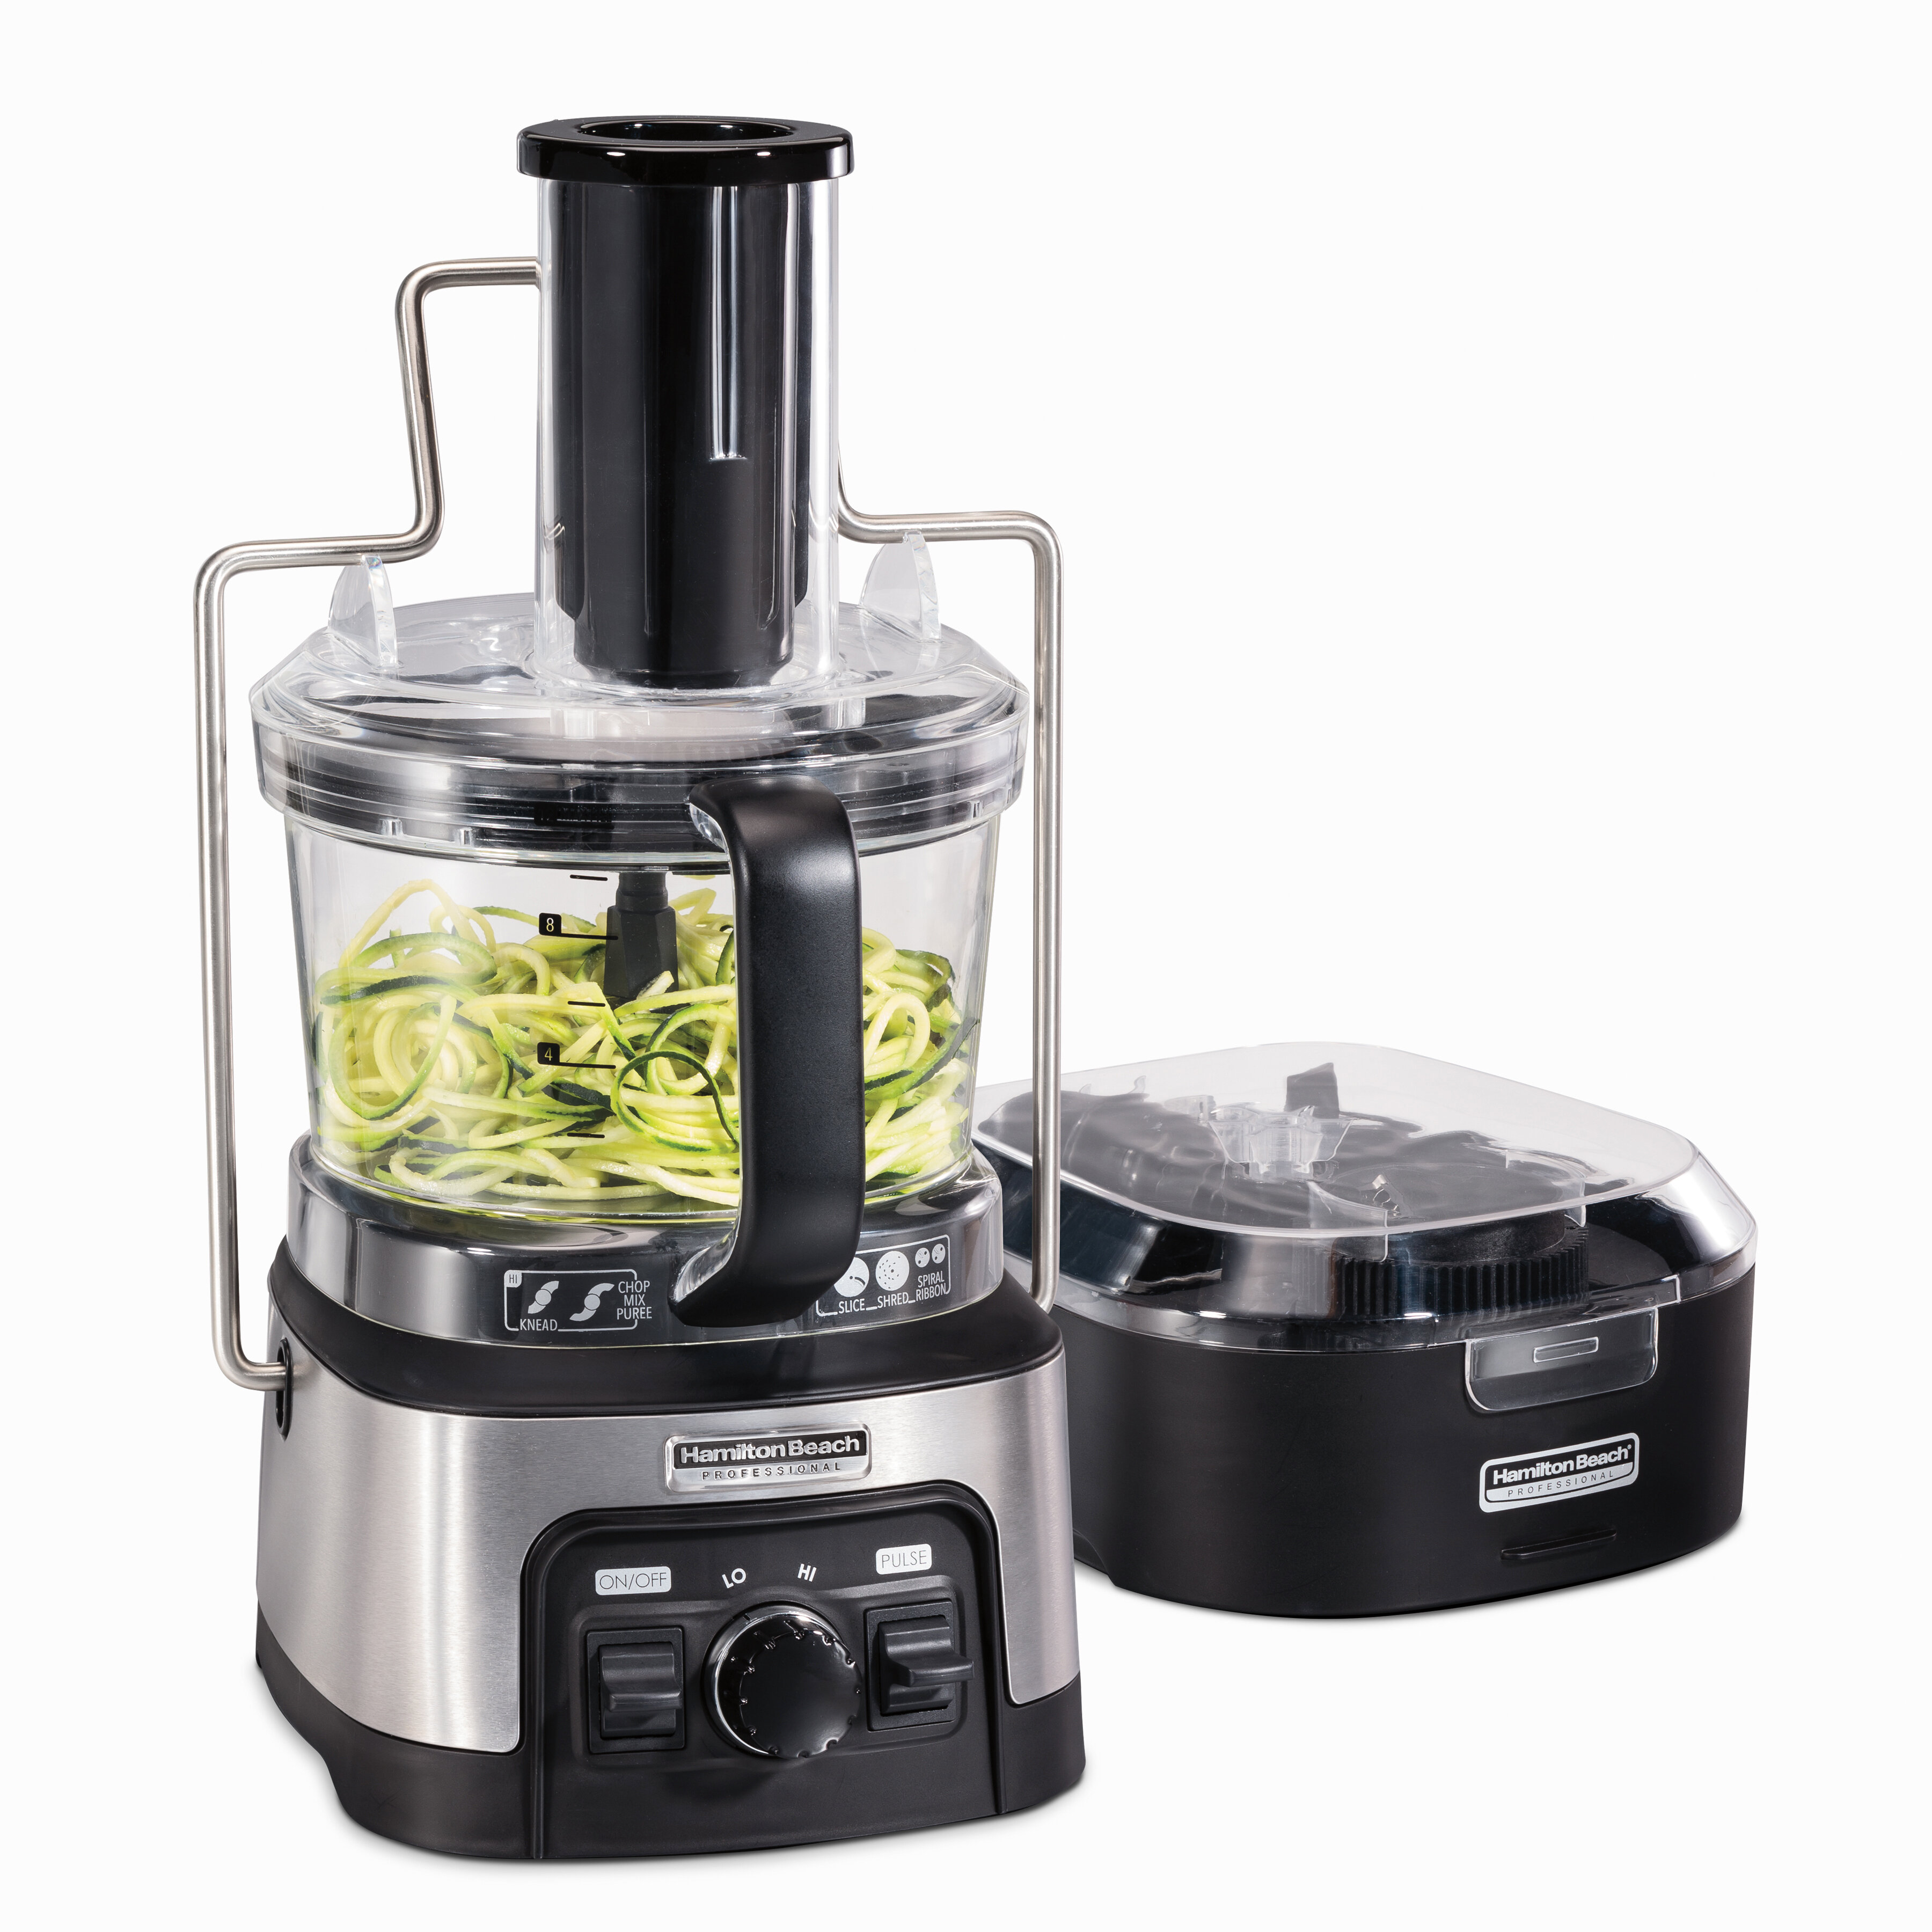 Hamilton Beach® Professional Spiralizing Stack & Snap Food Processor 12 Cup  Capacity